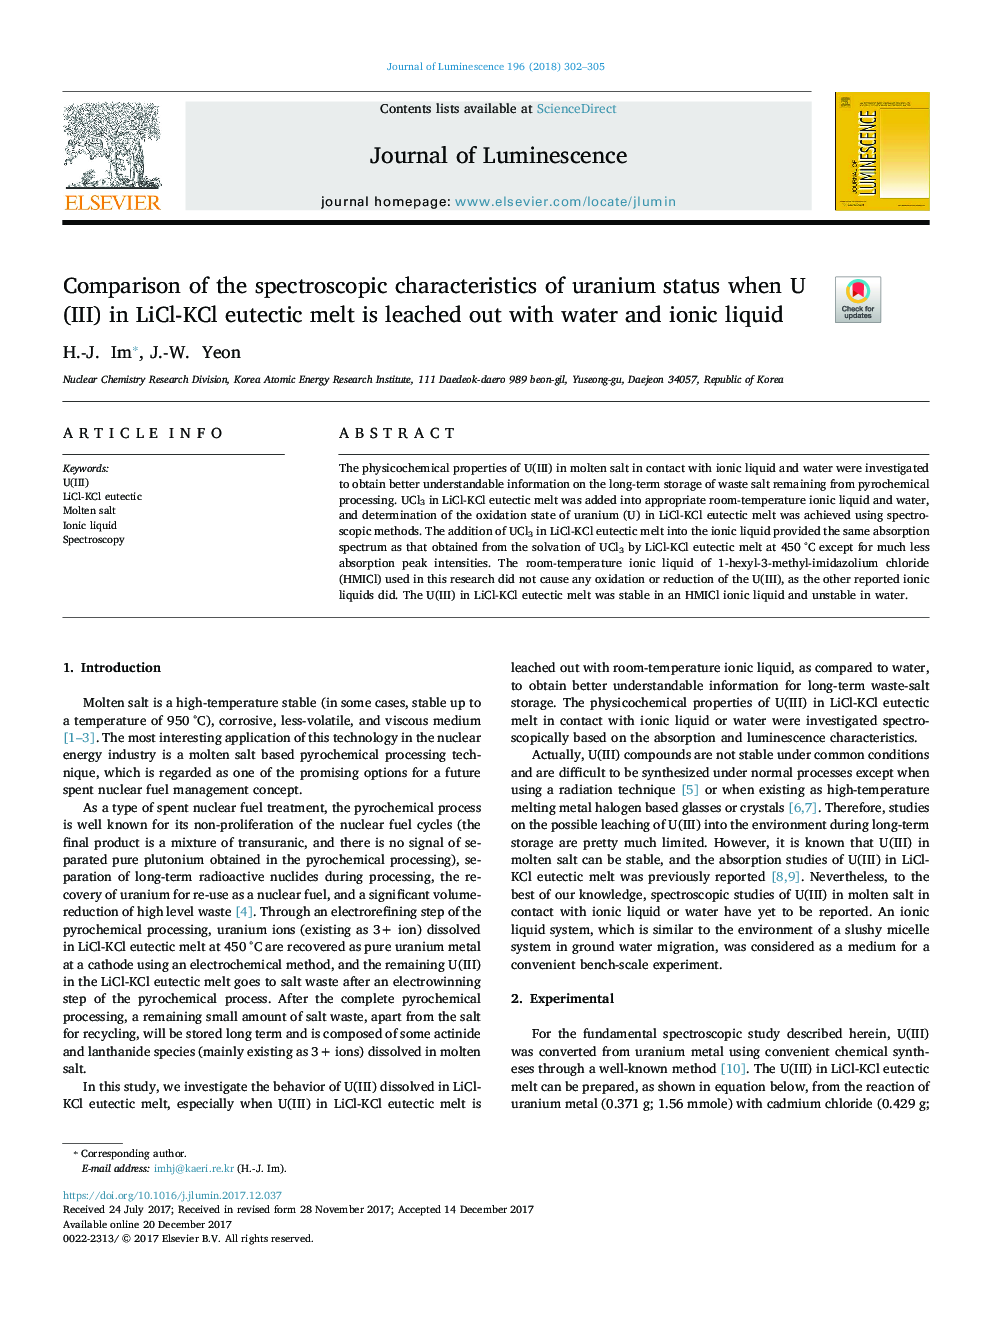 Comparison of the spectroscopic characteristics of uranium status when U(III) in LiCl-KCl eutectic melt is leached out with water and ionic liquid